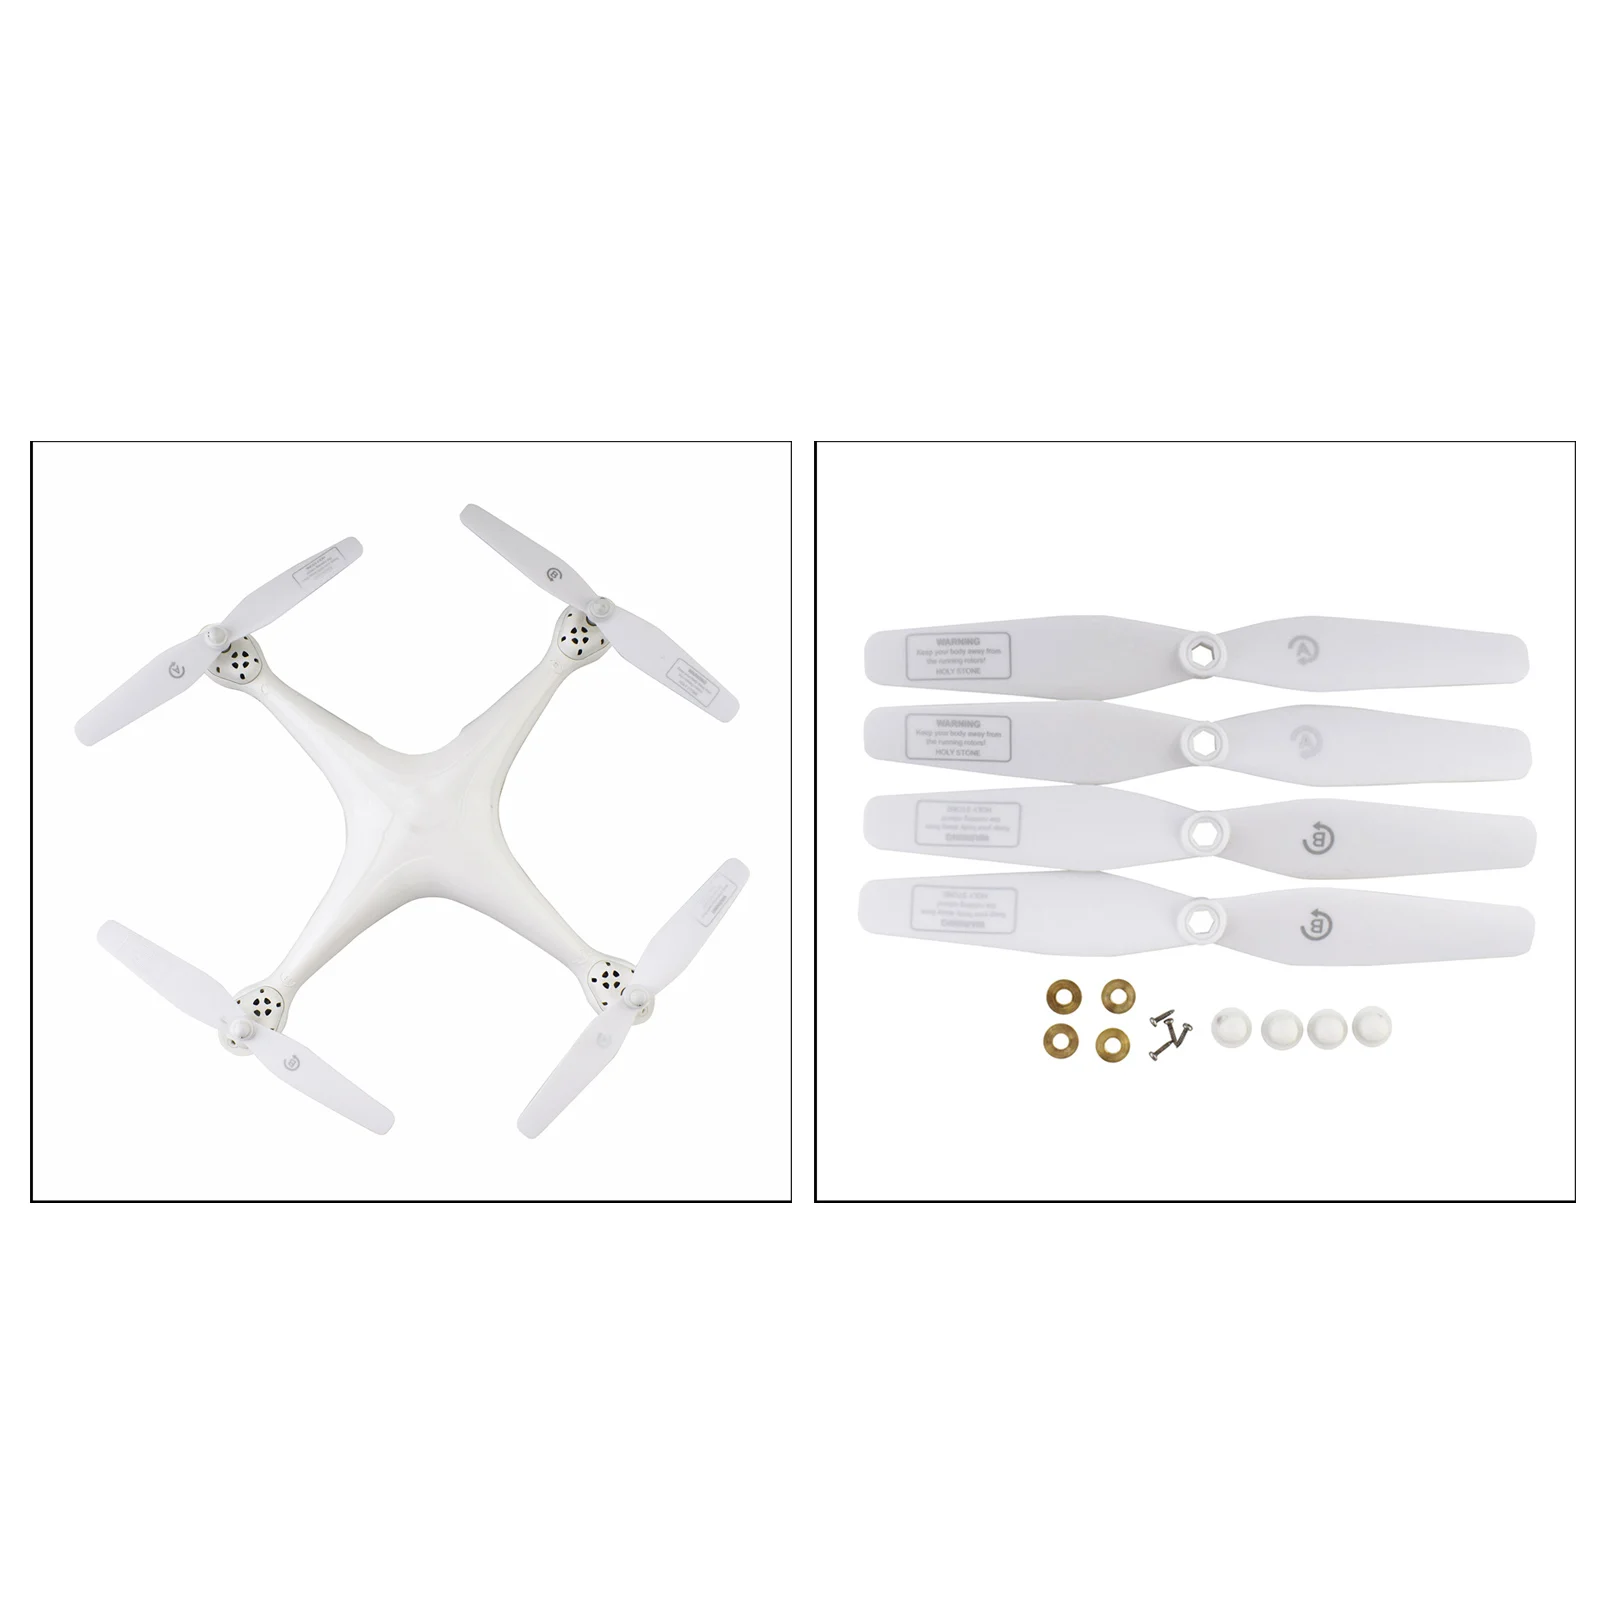 4PCS RC Drone Quick Release Plastic Foldable Propeller for SJRC S20W S30W T18 RC Quadcopter Accessories